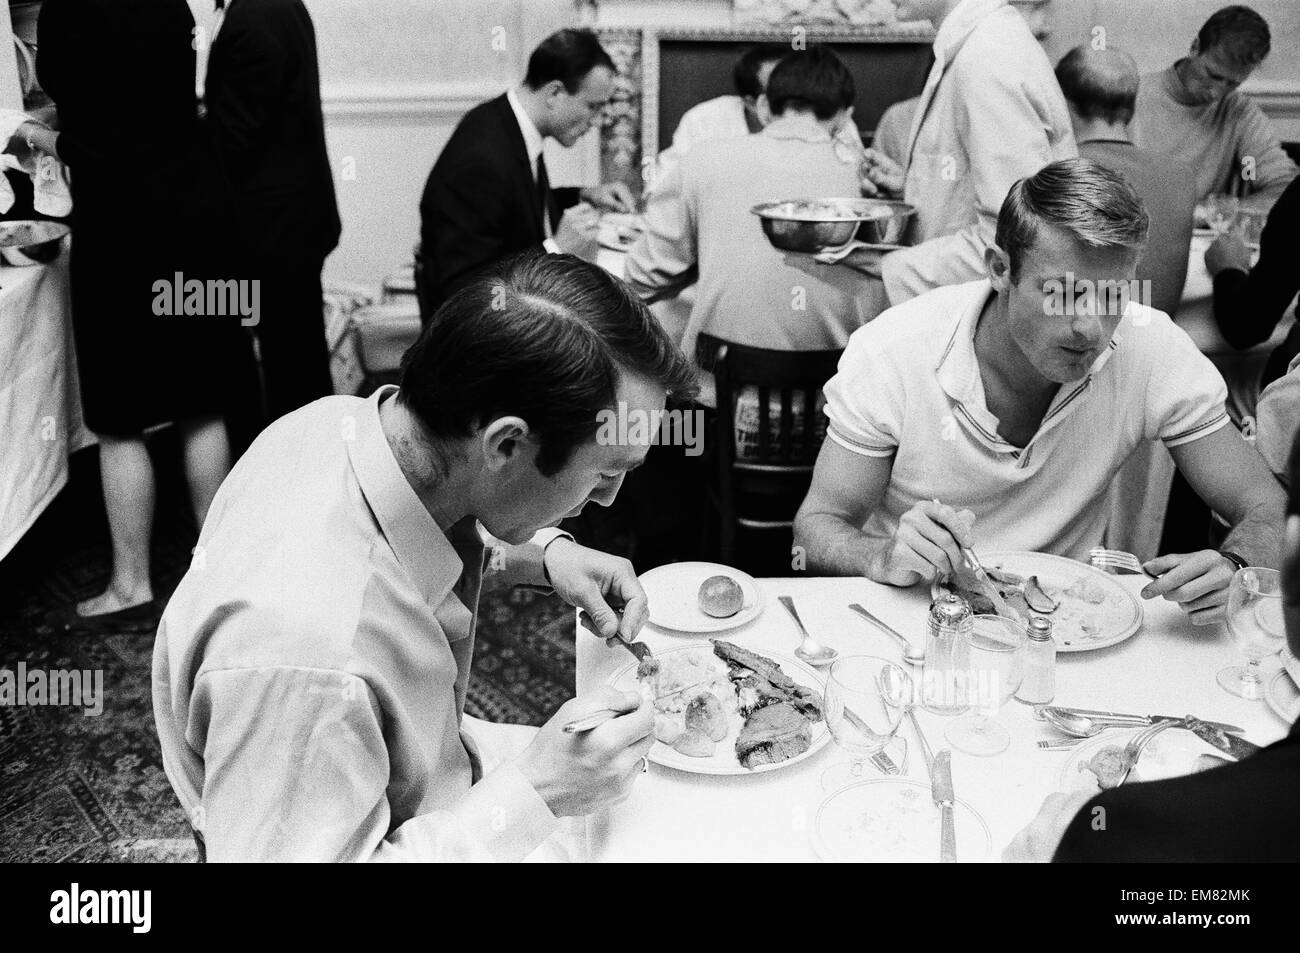 Members of the England football team Jimmy Greaves (left) and Roger Hunt eating their breakfast at the team hotel in Hendon during the 1966 World Cup tournament. 10th July 1966. Stock Photo